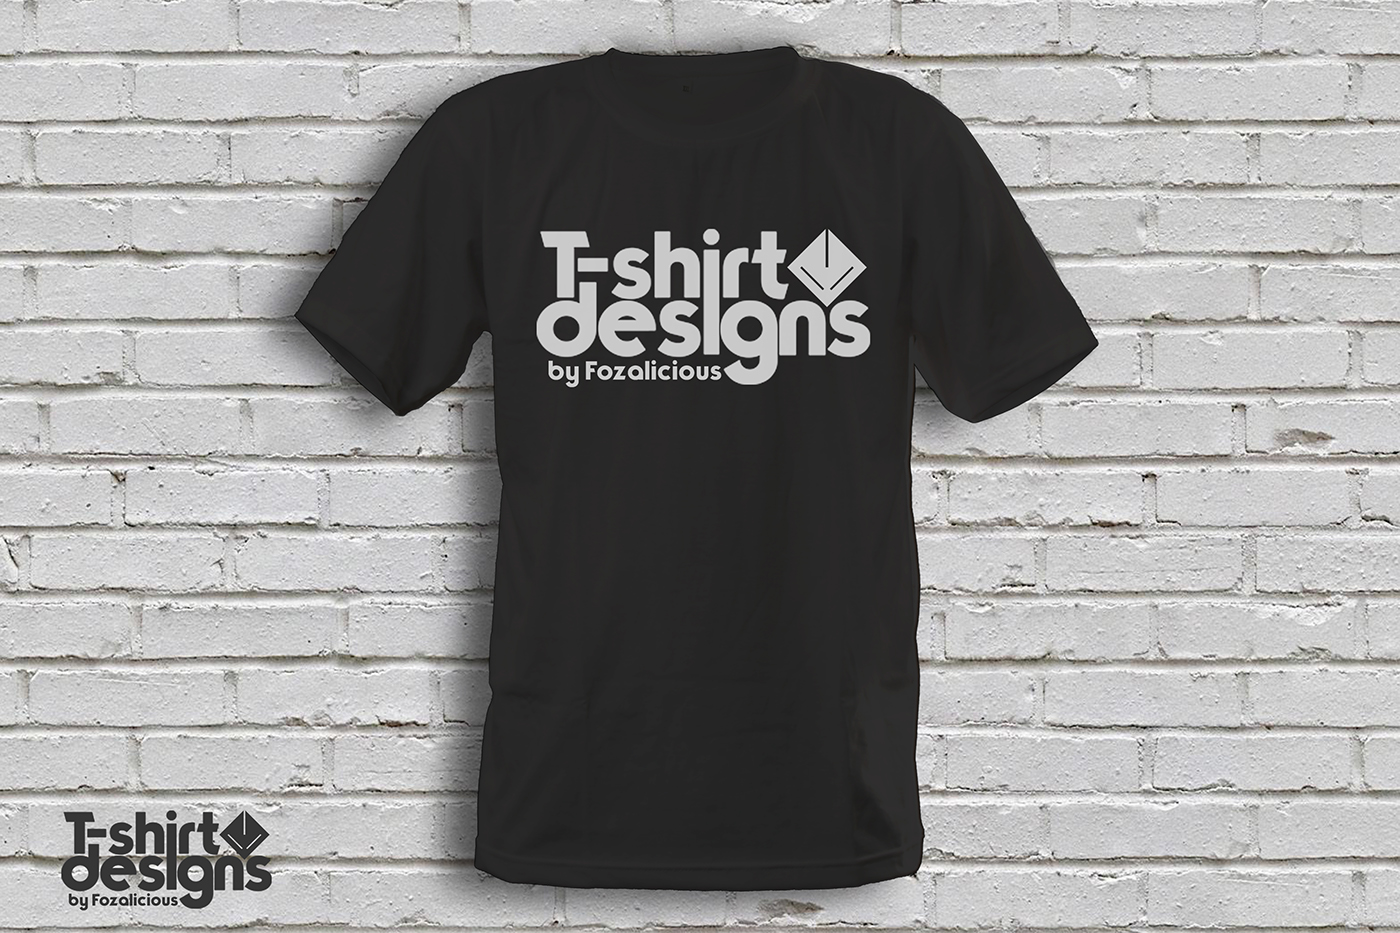 Download Free Realistic T-Shirt Mock up by Fozalicious on Behance